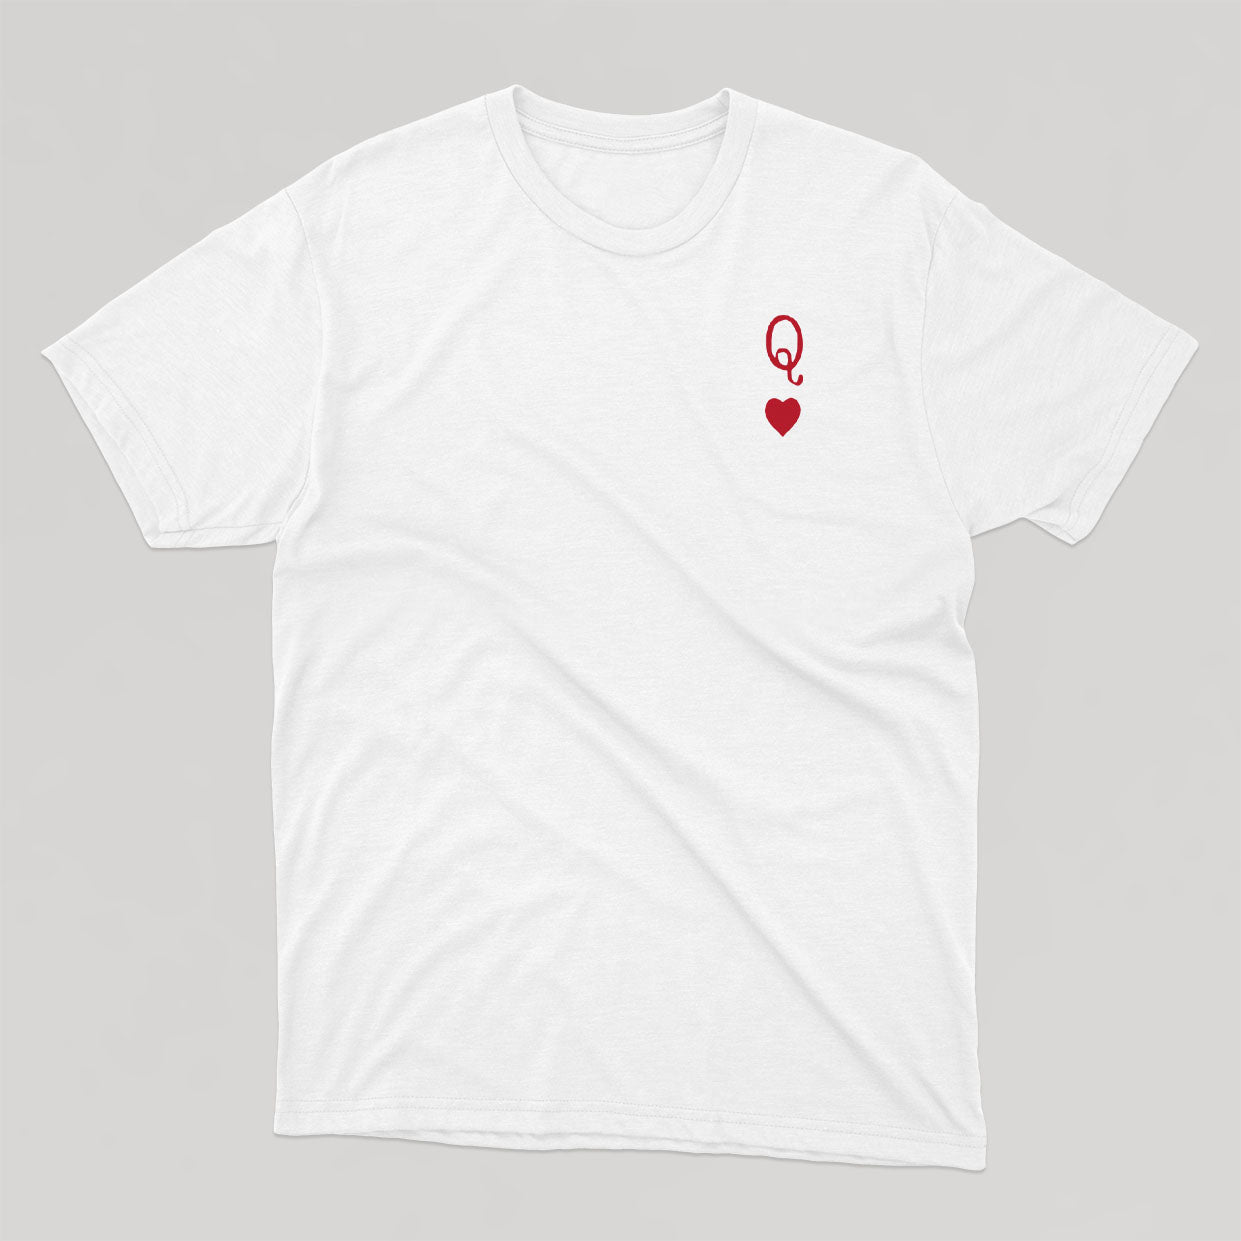 QUEEN OF HEARTS t-shirt unisexe - tamelo boutique